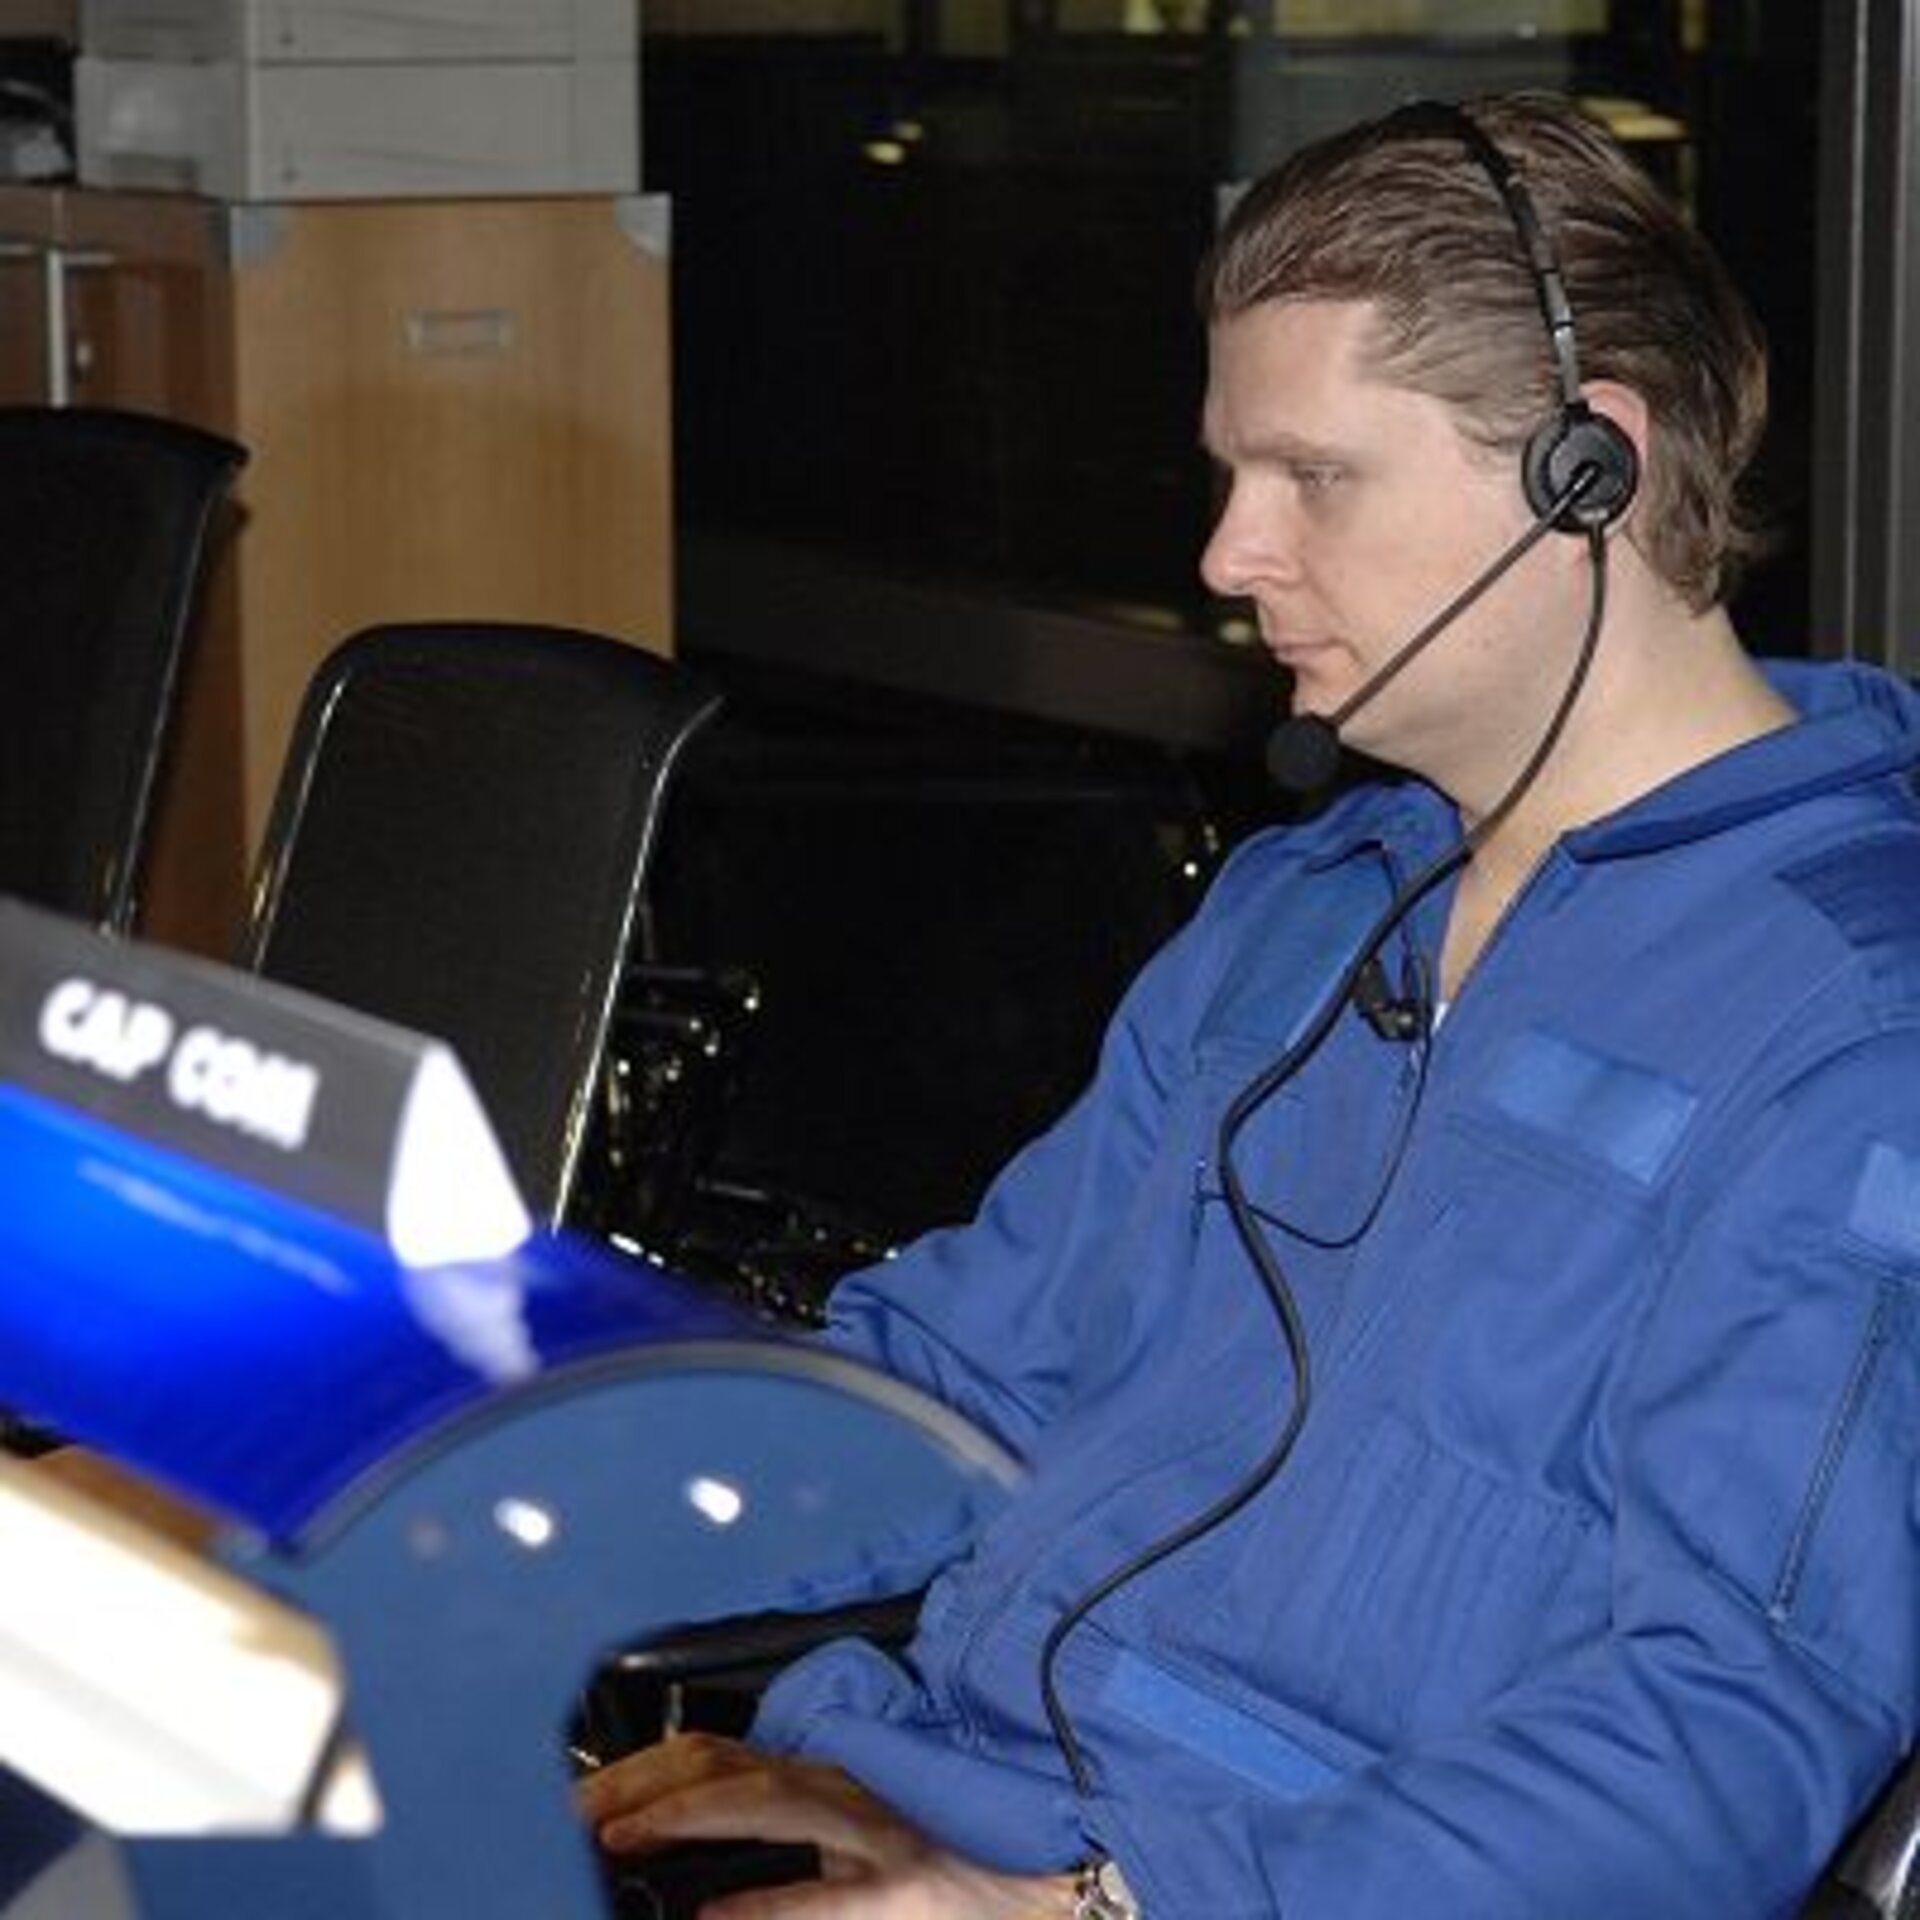 Damir Maras as experiment controller during mission control simulation